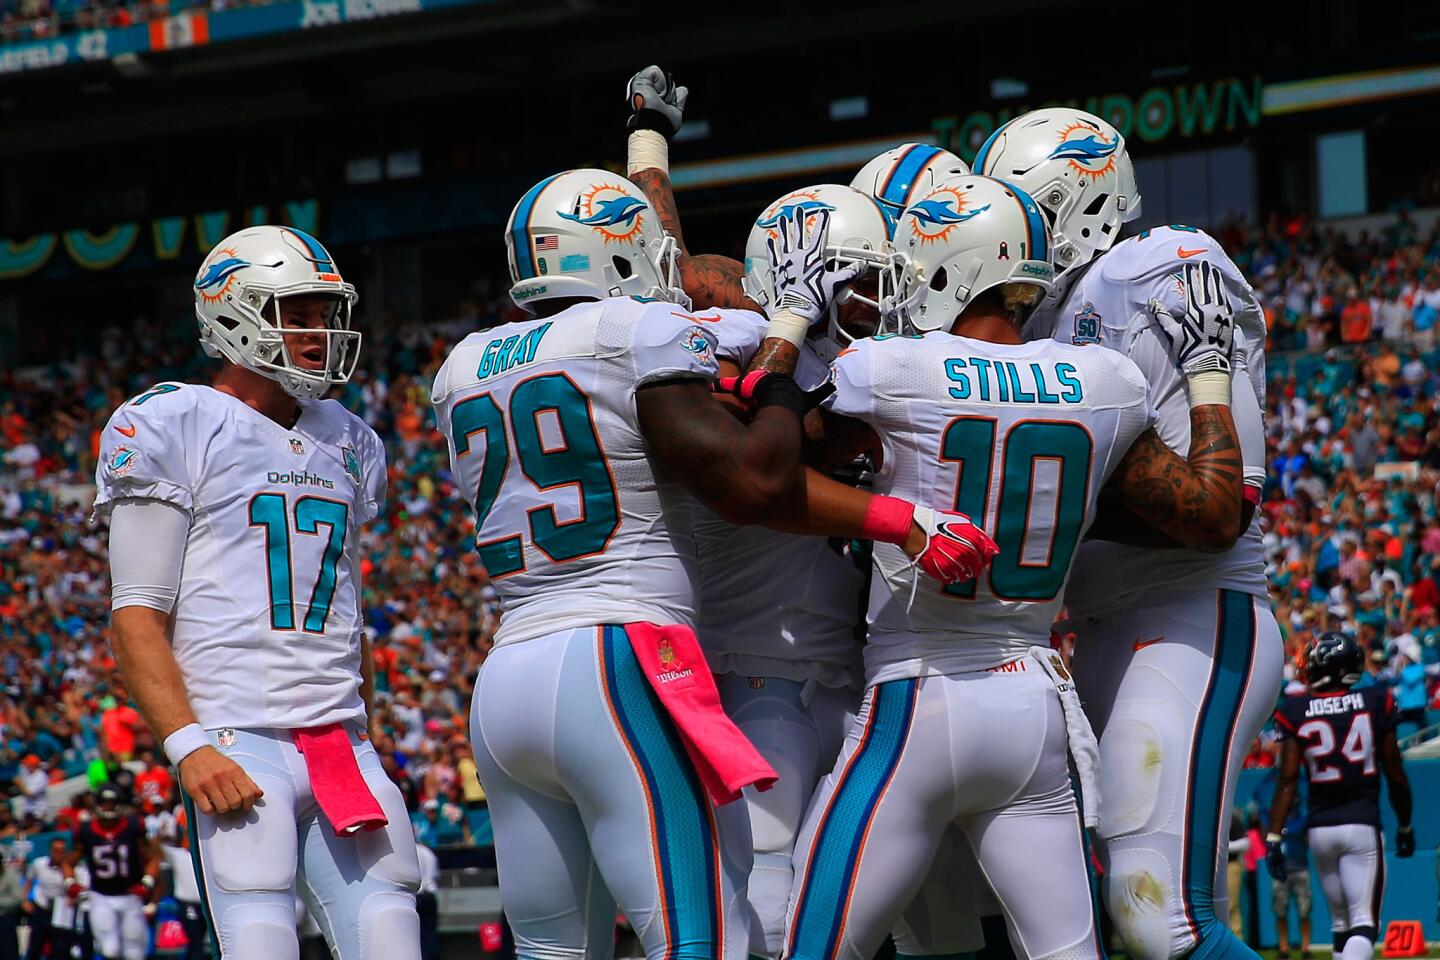 MIAMI GARDENS, FL - OCTOBER 25: Rishard Matthews #18 of the Miami Dolphins is congratulated by his teammates for a touchdown in the first quarter during a game against the Houston Texans at Sun Life Stadium on October 25, 2015 in Miami Gardens, Florida. (Photo by Chris Trotman/Getty Images) ORG XMIT: 570292009